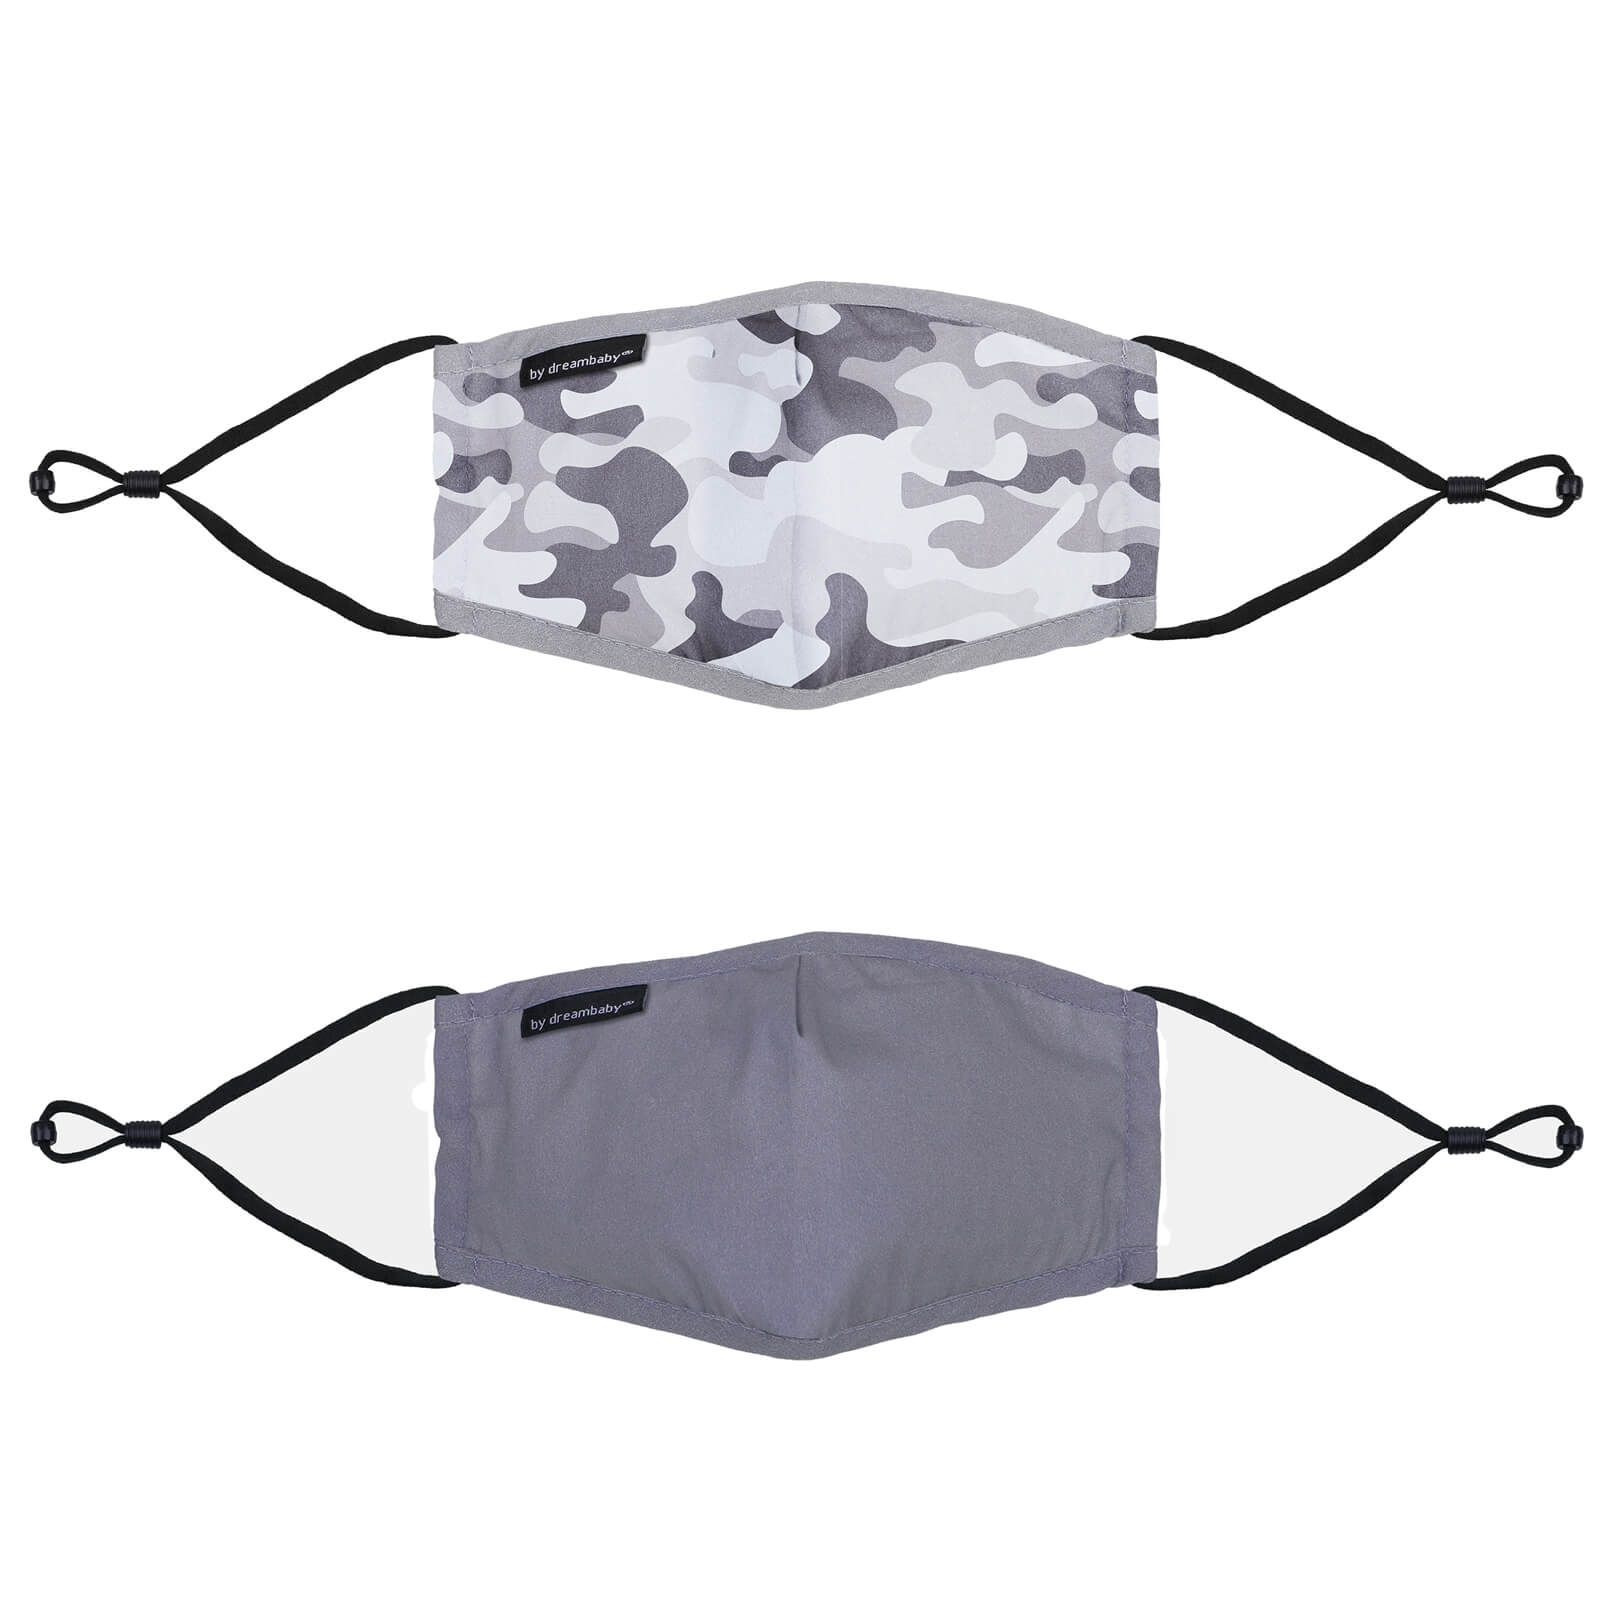 Dreambaby Reusable Camouflage/Grey Face Masks (Youth) - 2 Pack